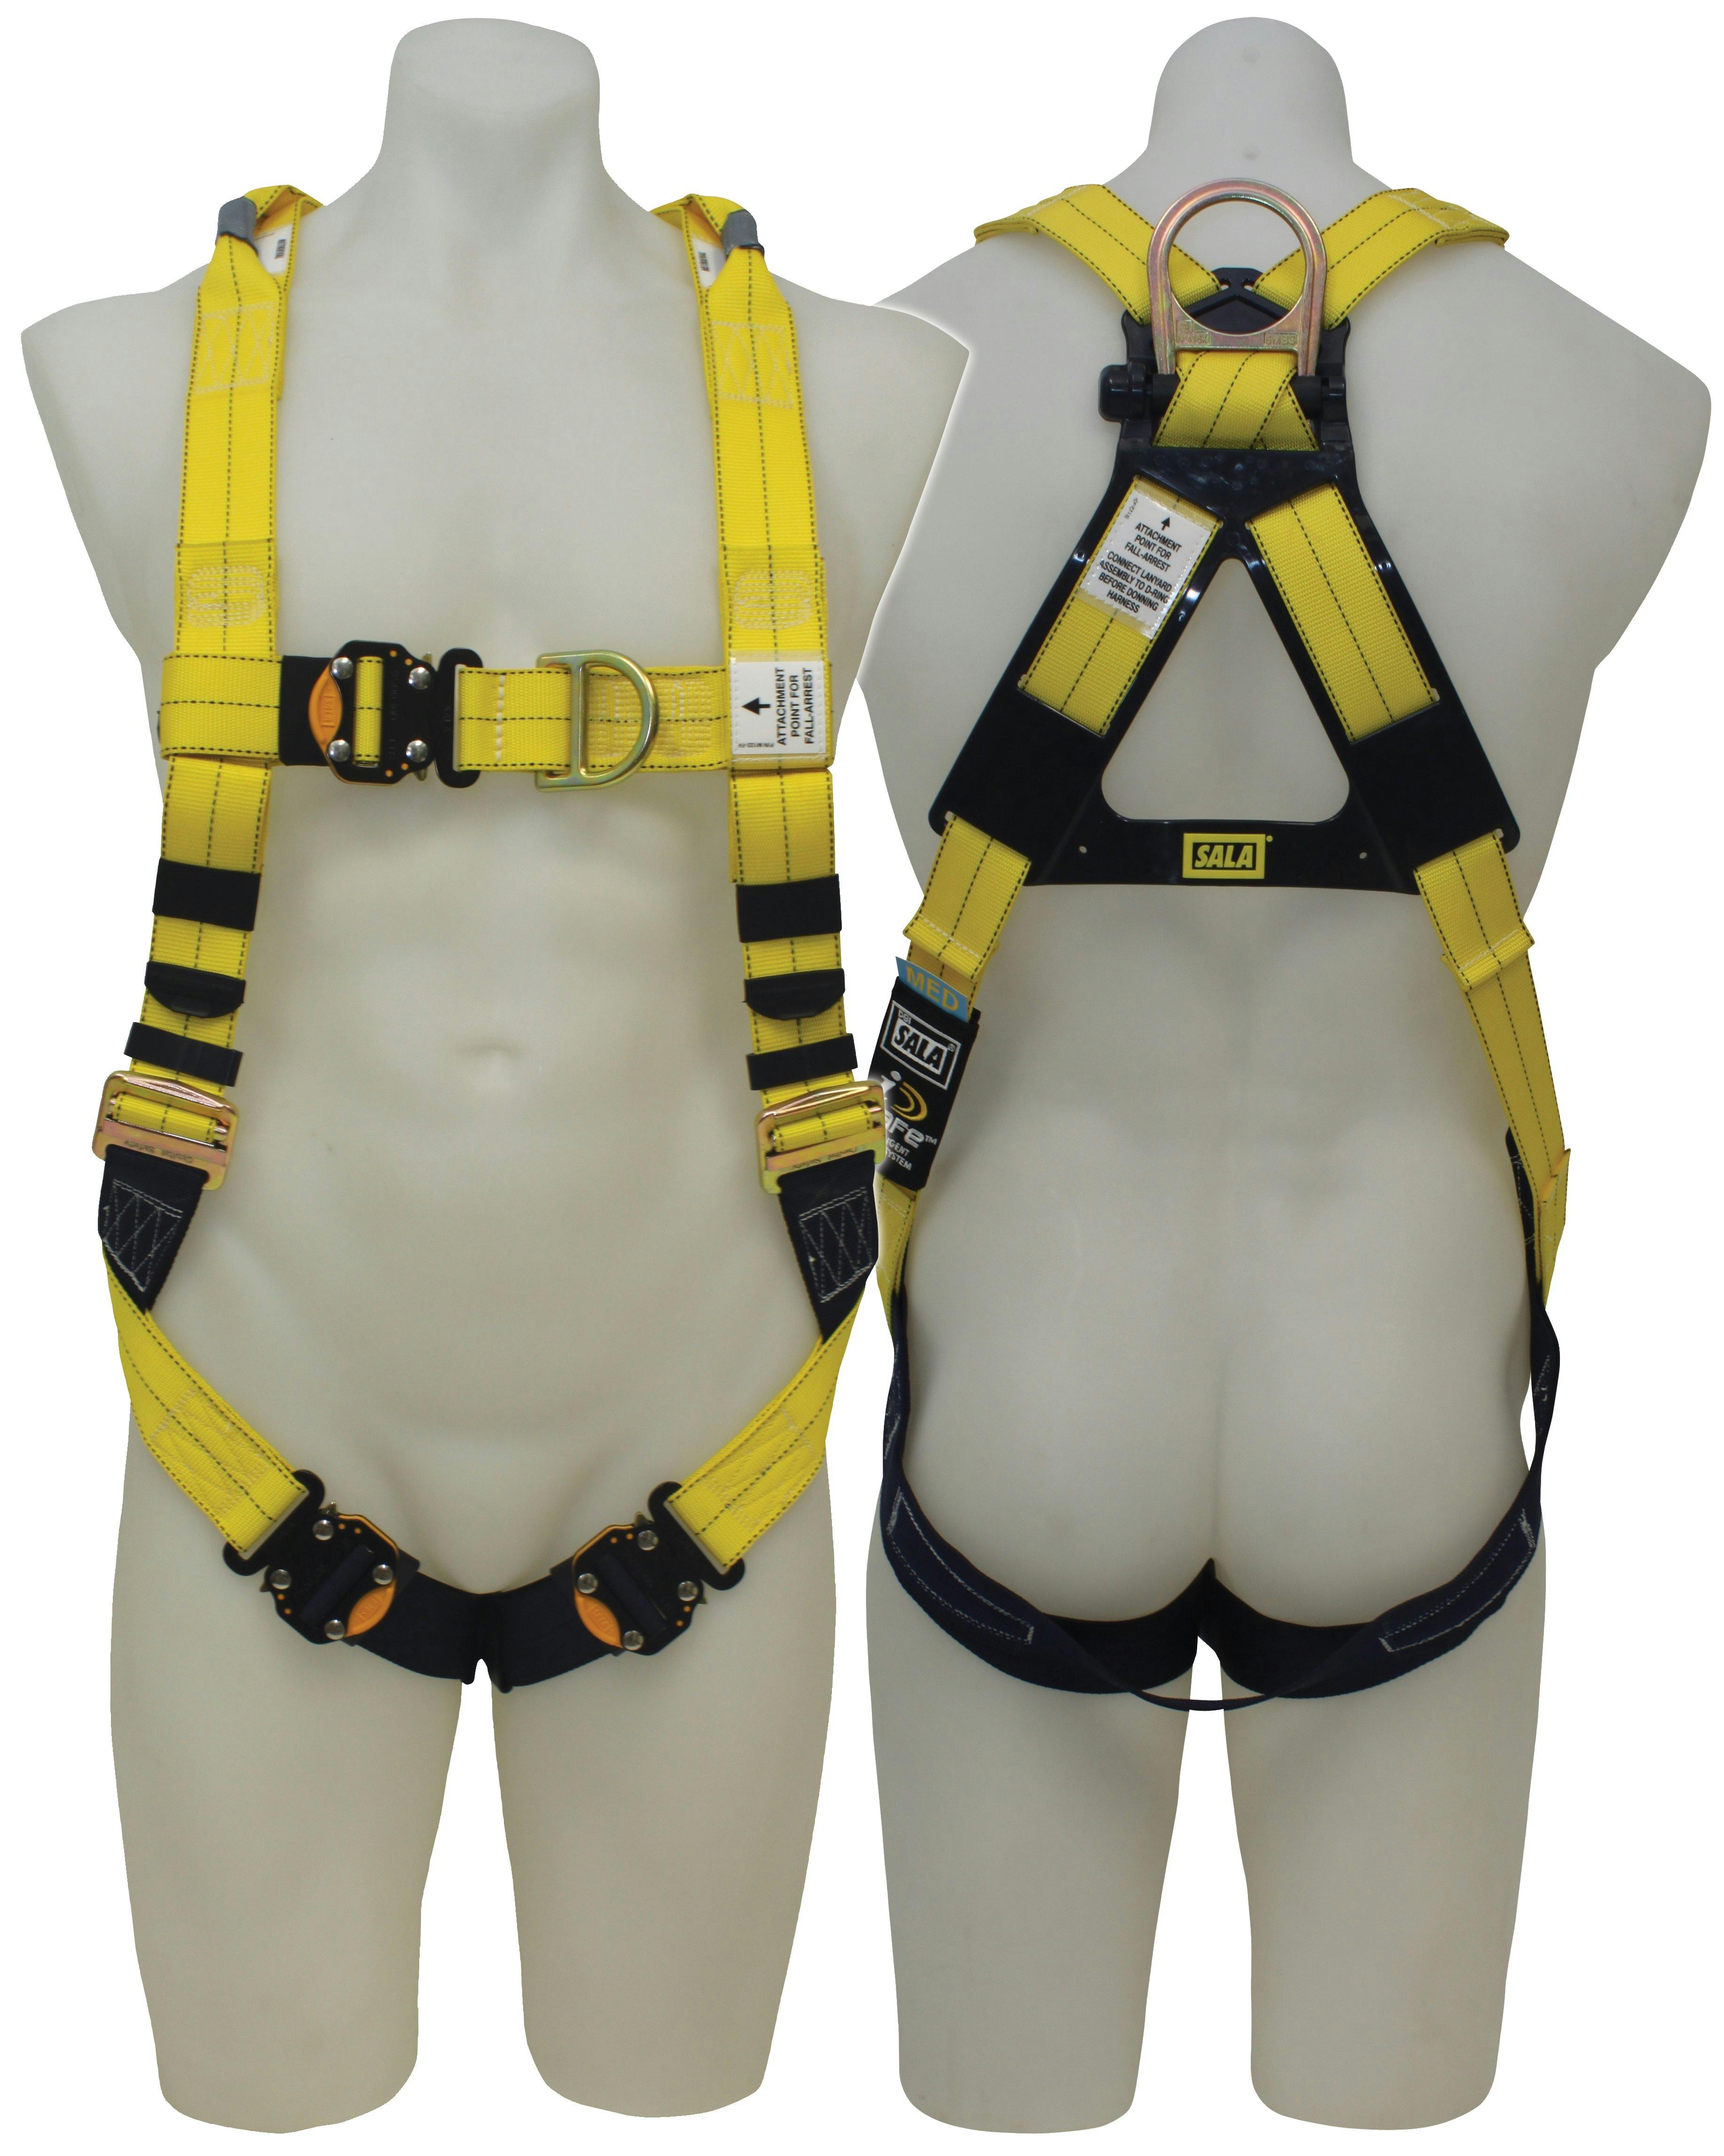 3M™ DBI-SALA® Delta™ Miners Harness with Stainless Steel Hardware 823M1035, Yellow, Medium, 1 EA/Case